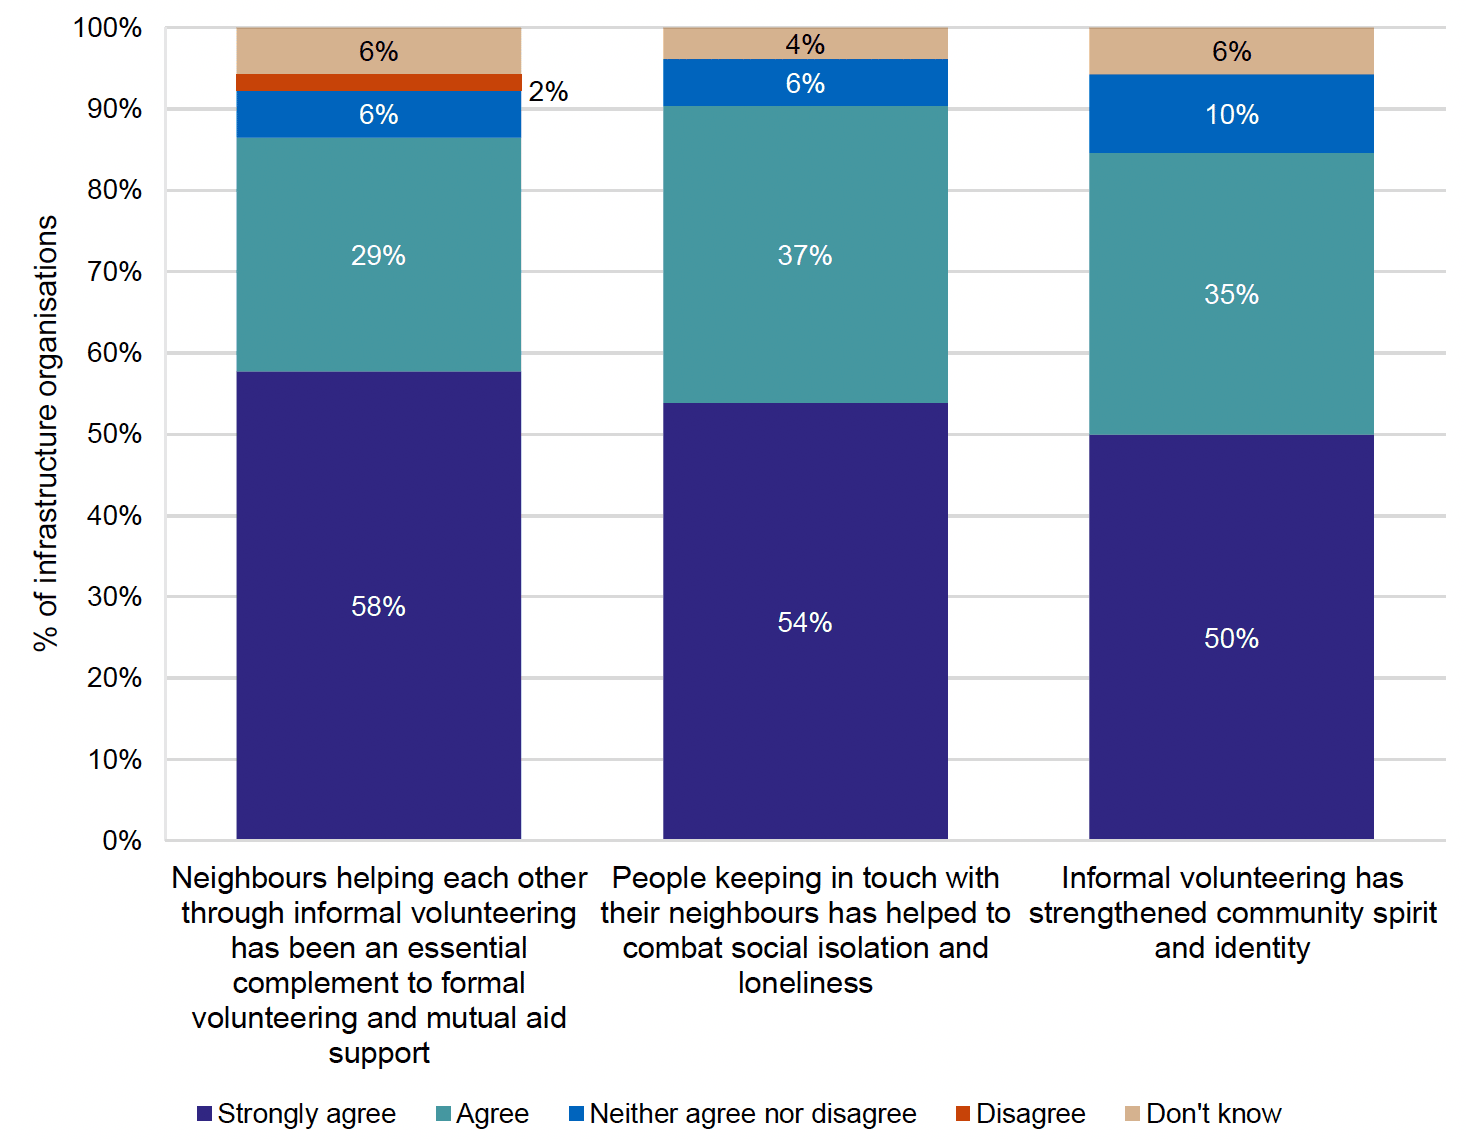 Chart showing infrastructure organisation views on informal volunteering during COVID-19